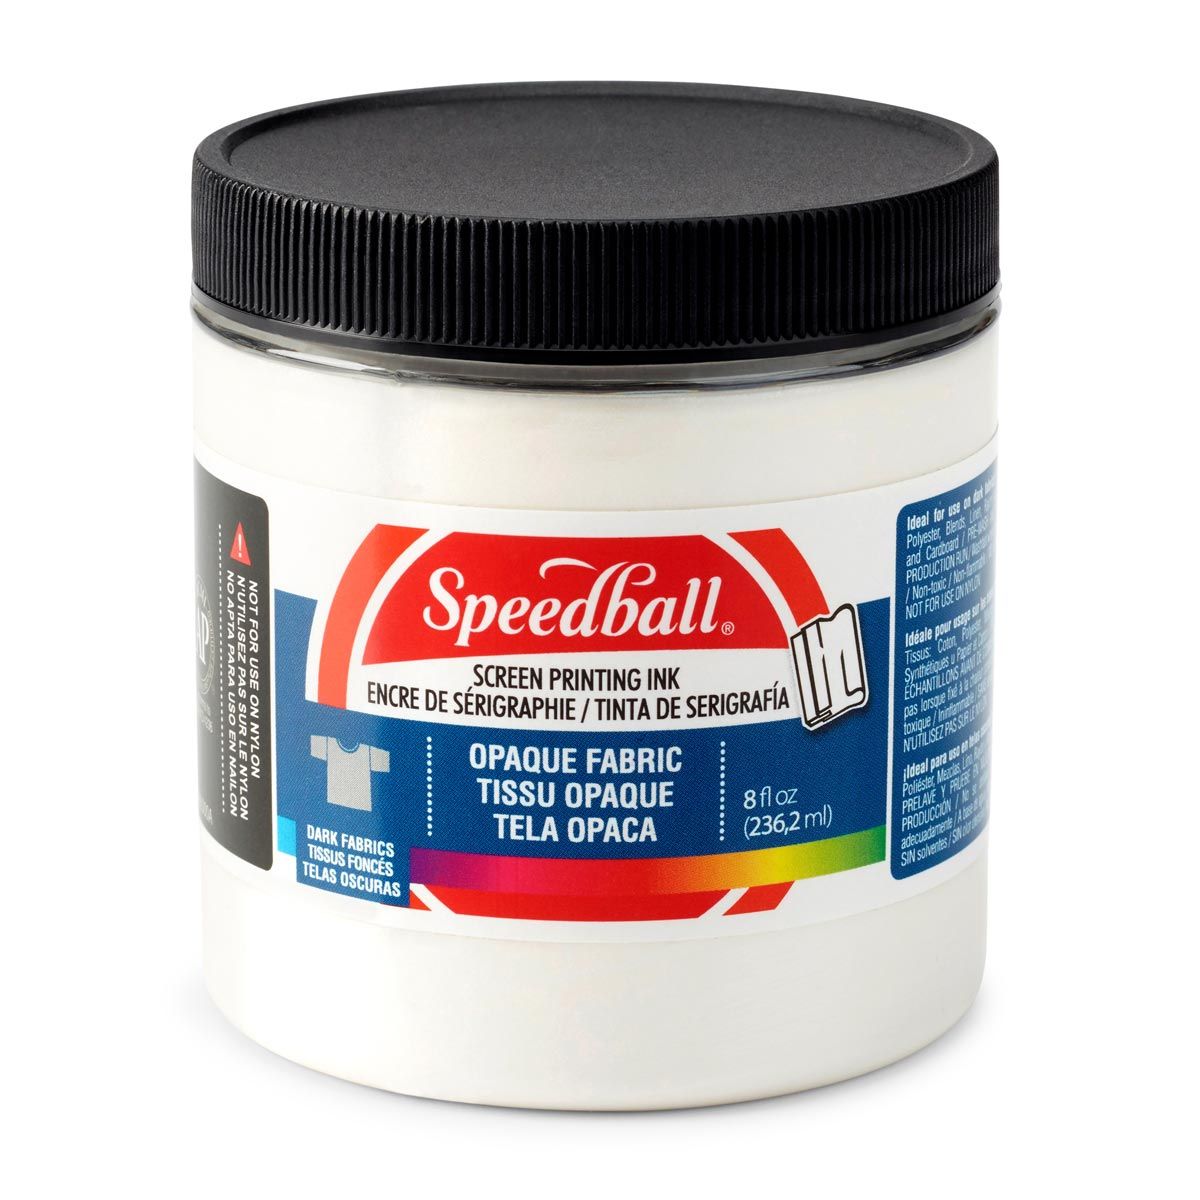 Speedball Iridescent Opaque Fabric Screen Printing Ink - Pearl White 8oz